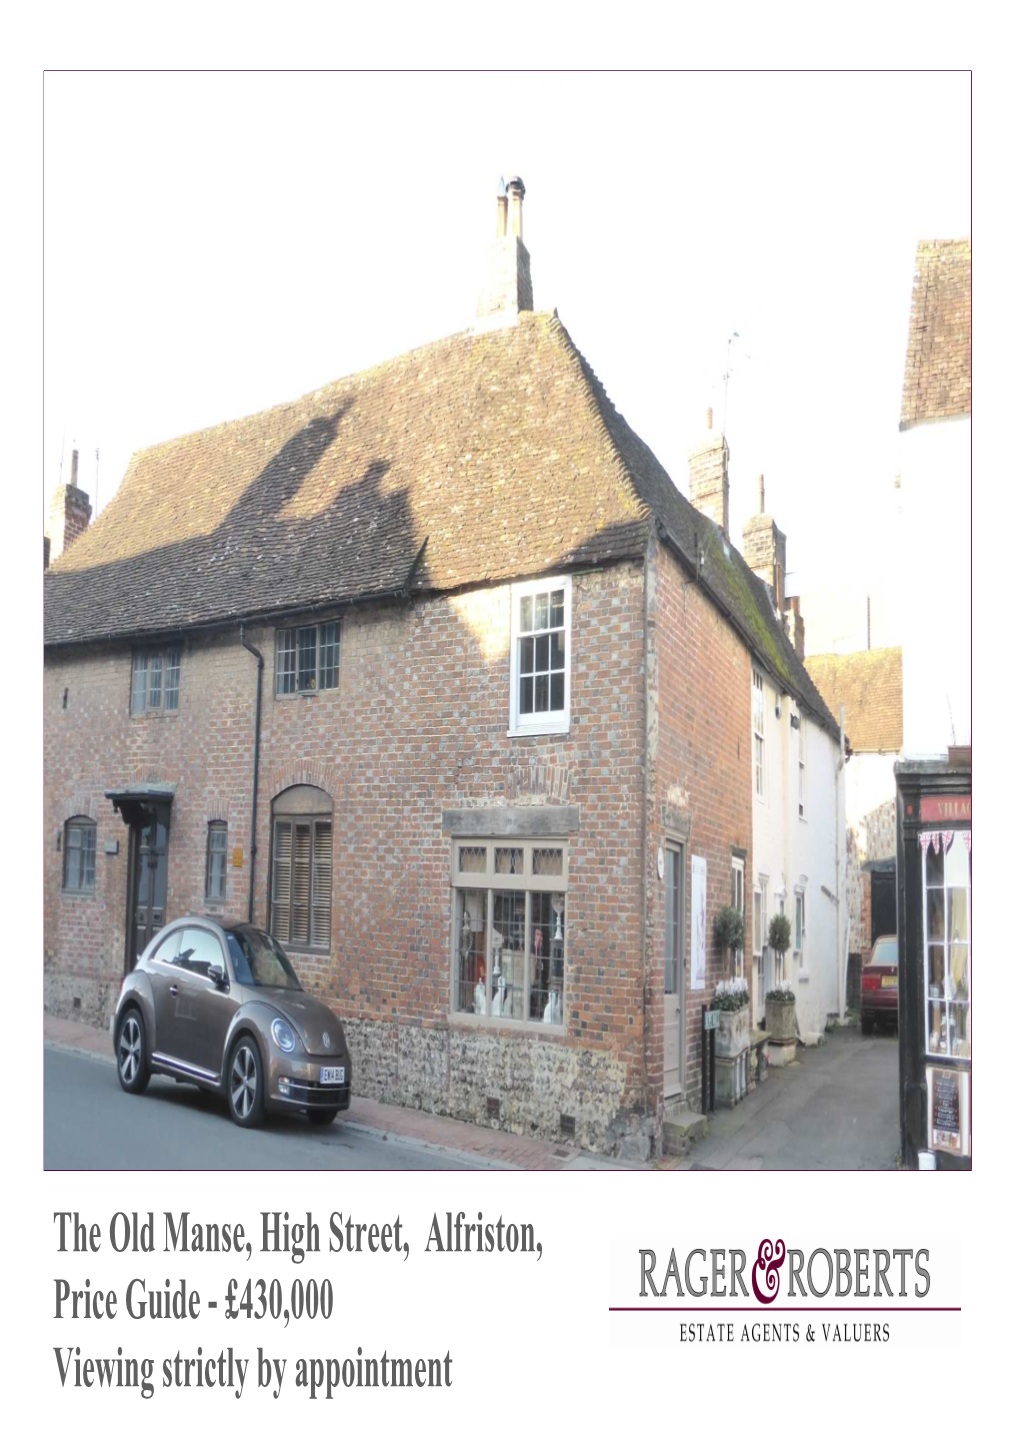 The Old Manse, High Street, Alfriston, Price Guide - £430,000